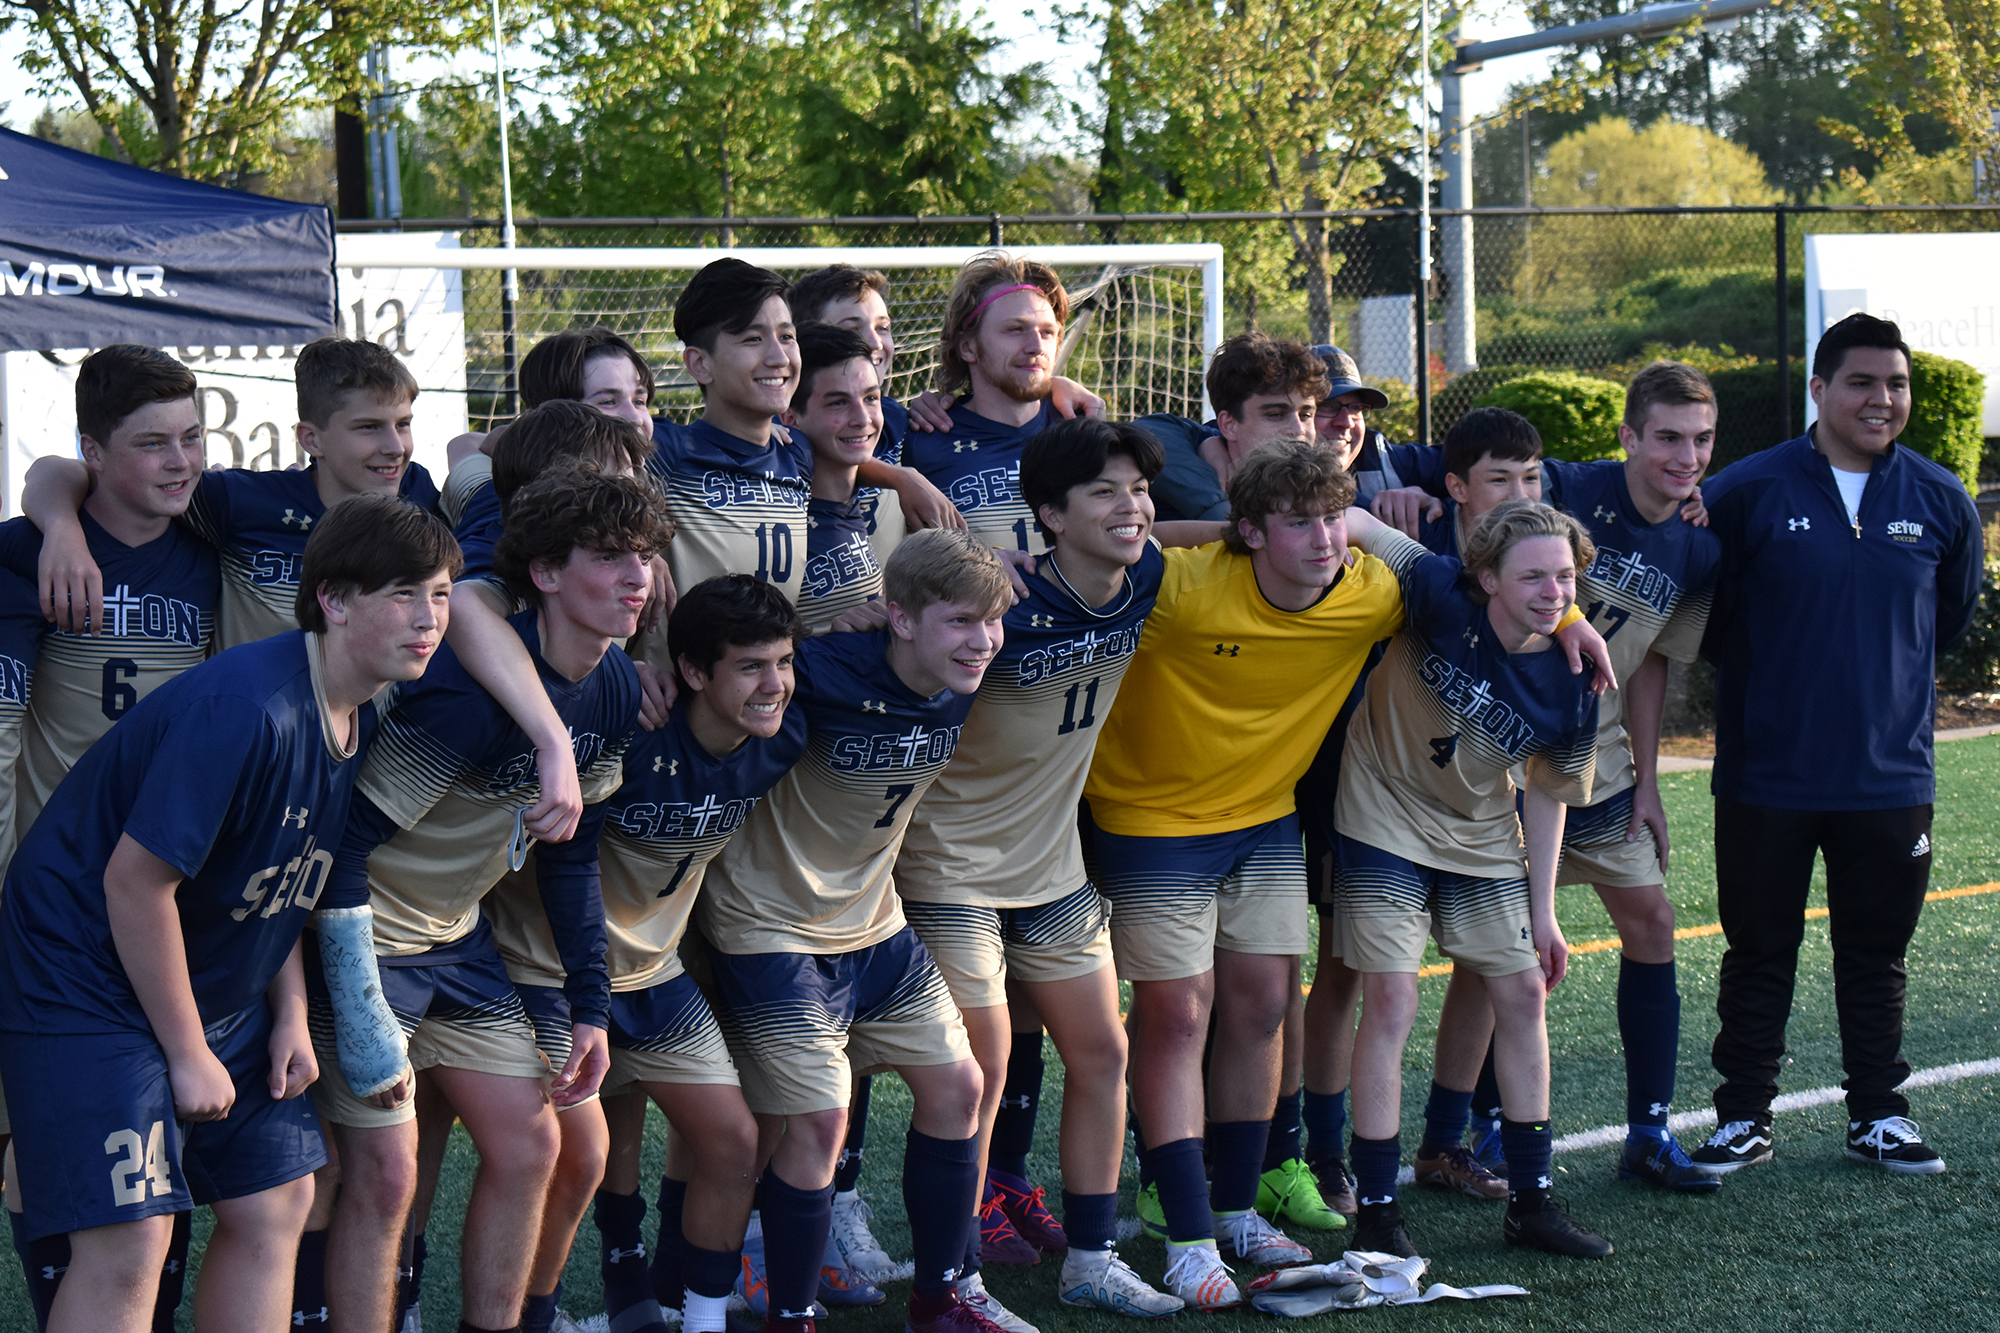 The Seton Catholic boys soccer team poses for a team photo after beating King's Way Christian 2-1 in a 1A district playoff game on Tuesday, May 9, 2023.